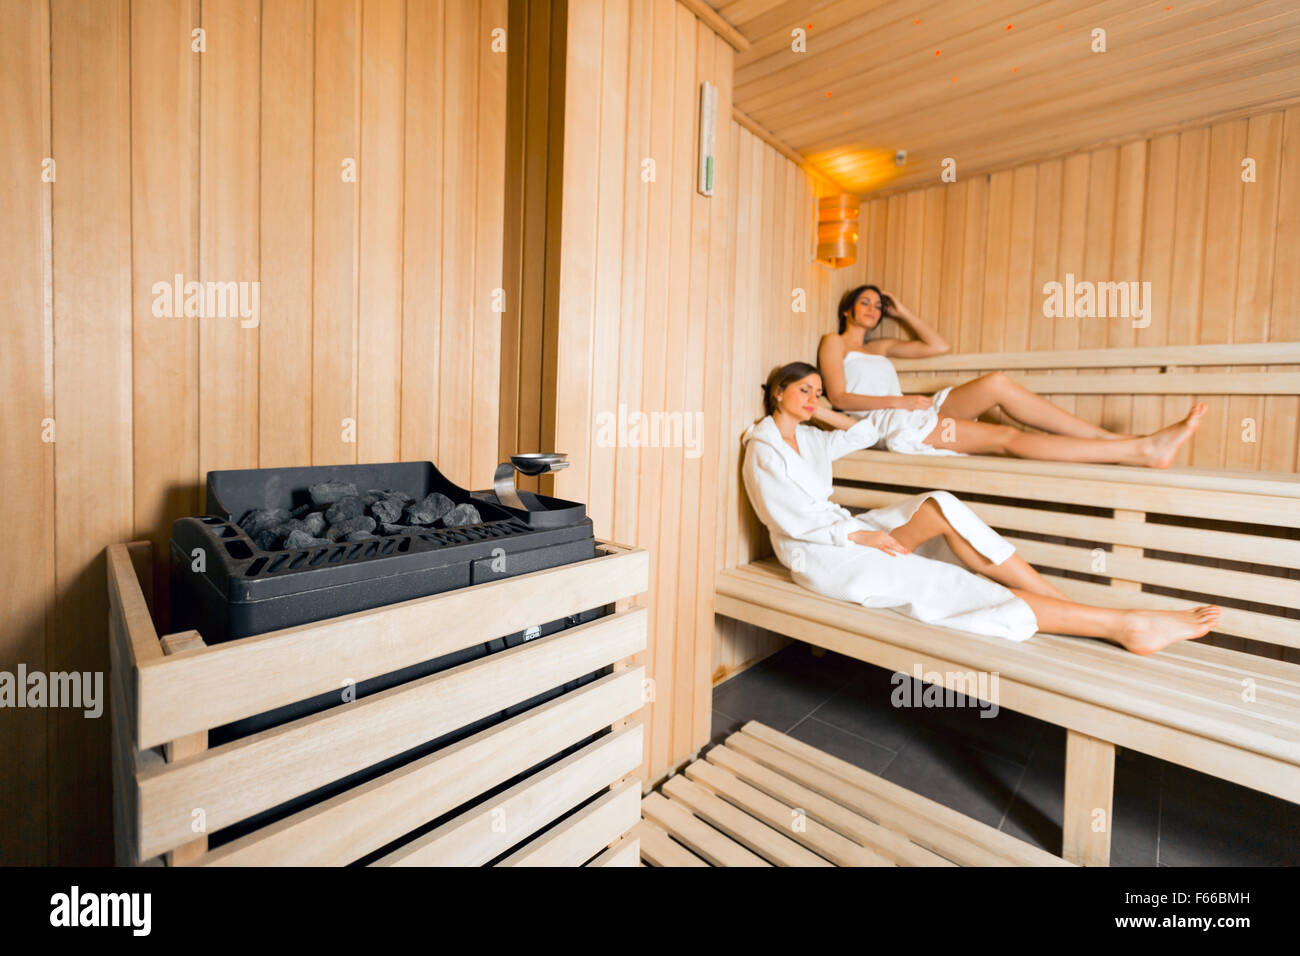 Sauna heater in a cozy sauna and girls relaxing in the background Stock Photo